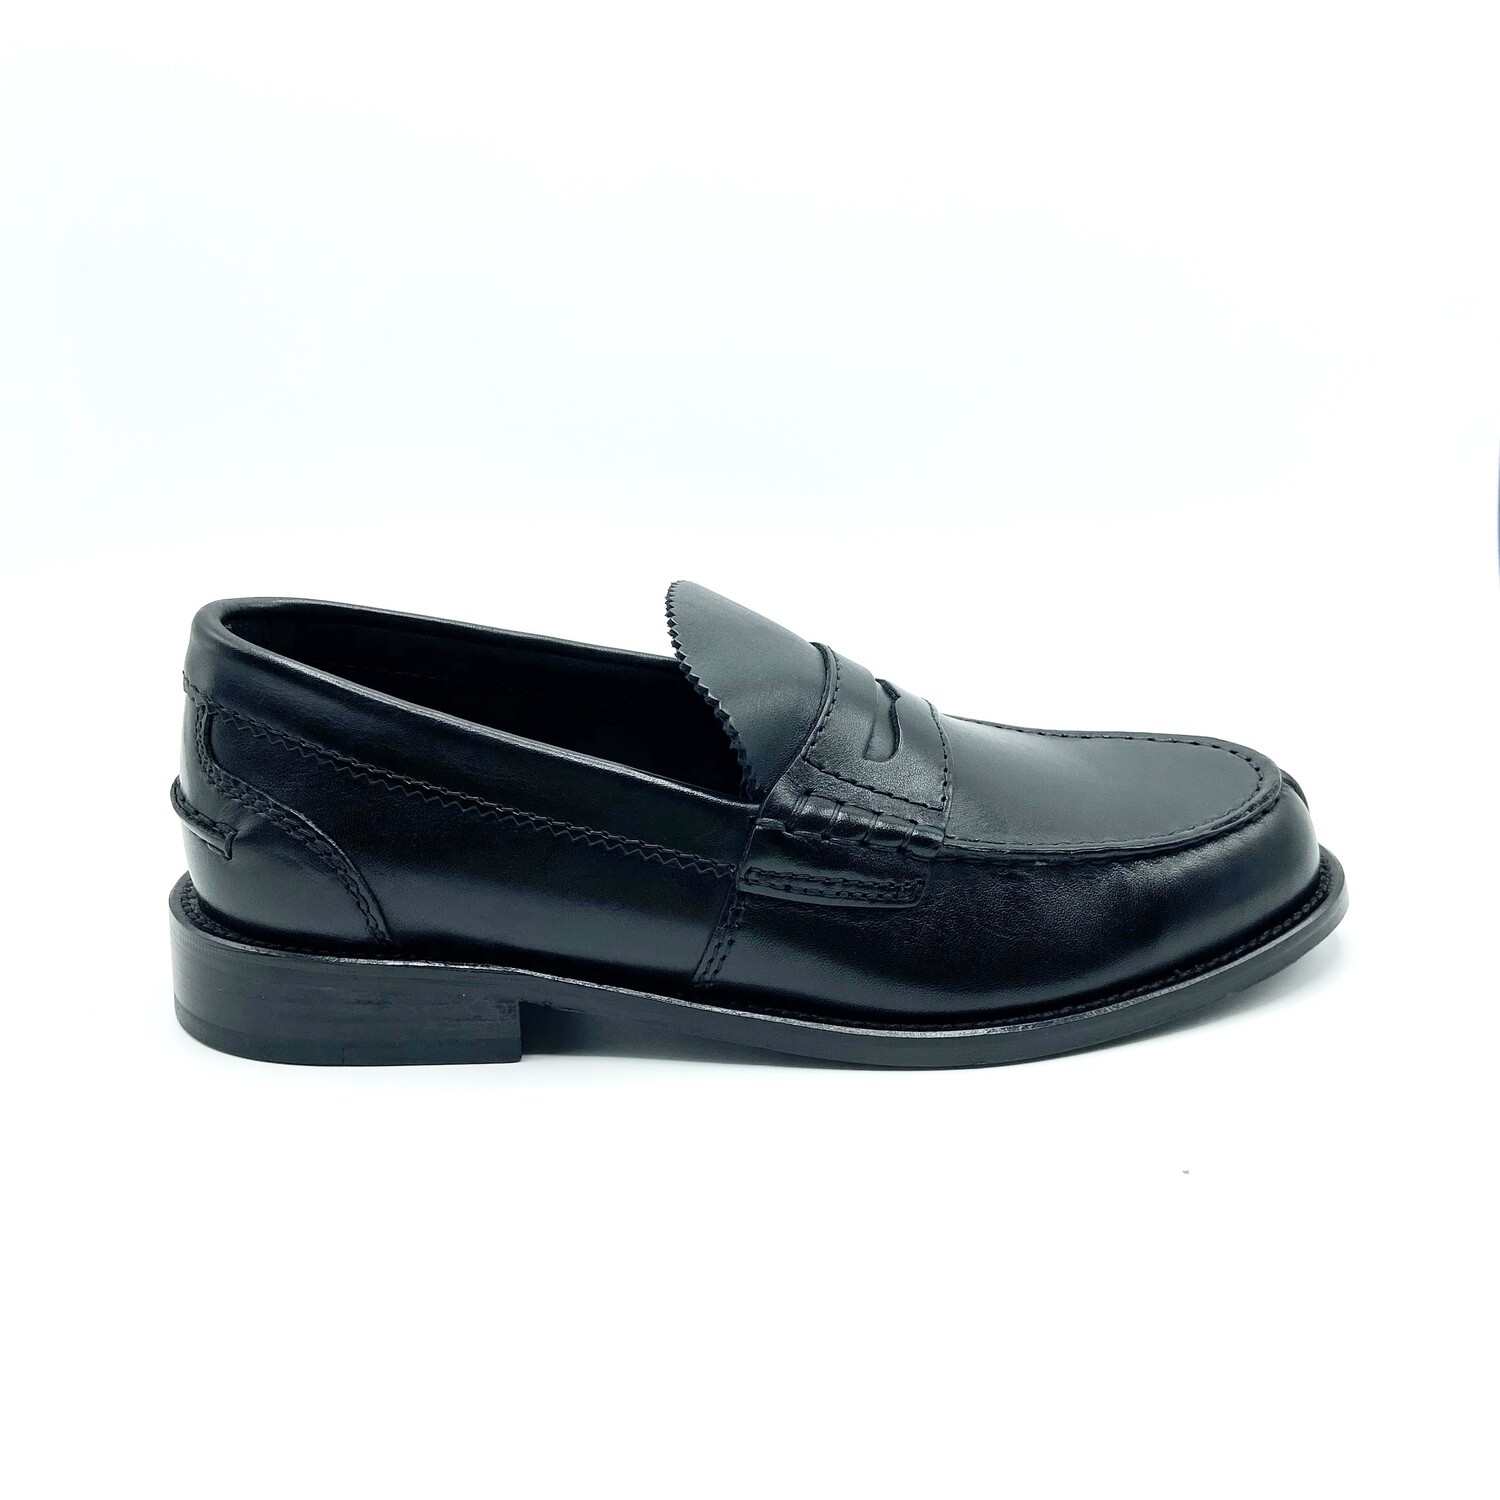 Mocassino Clarks art.Beary Loafer colore nero